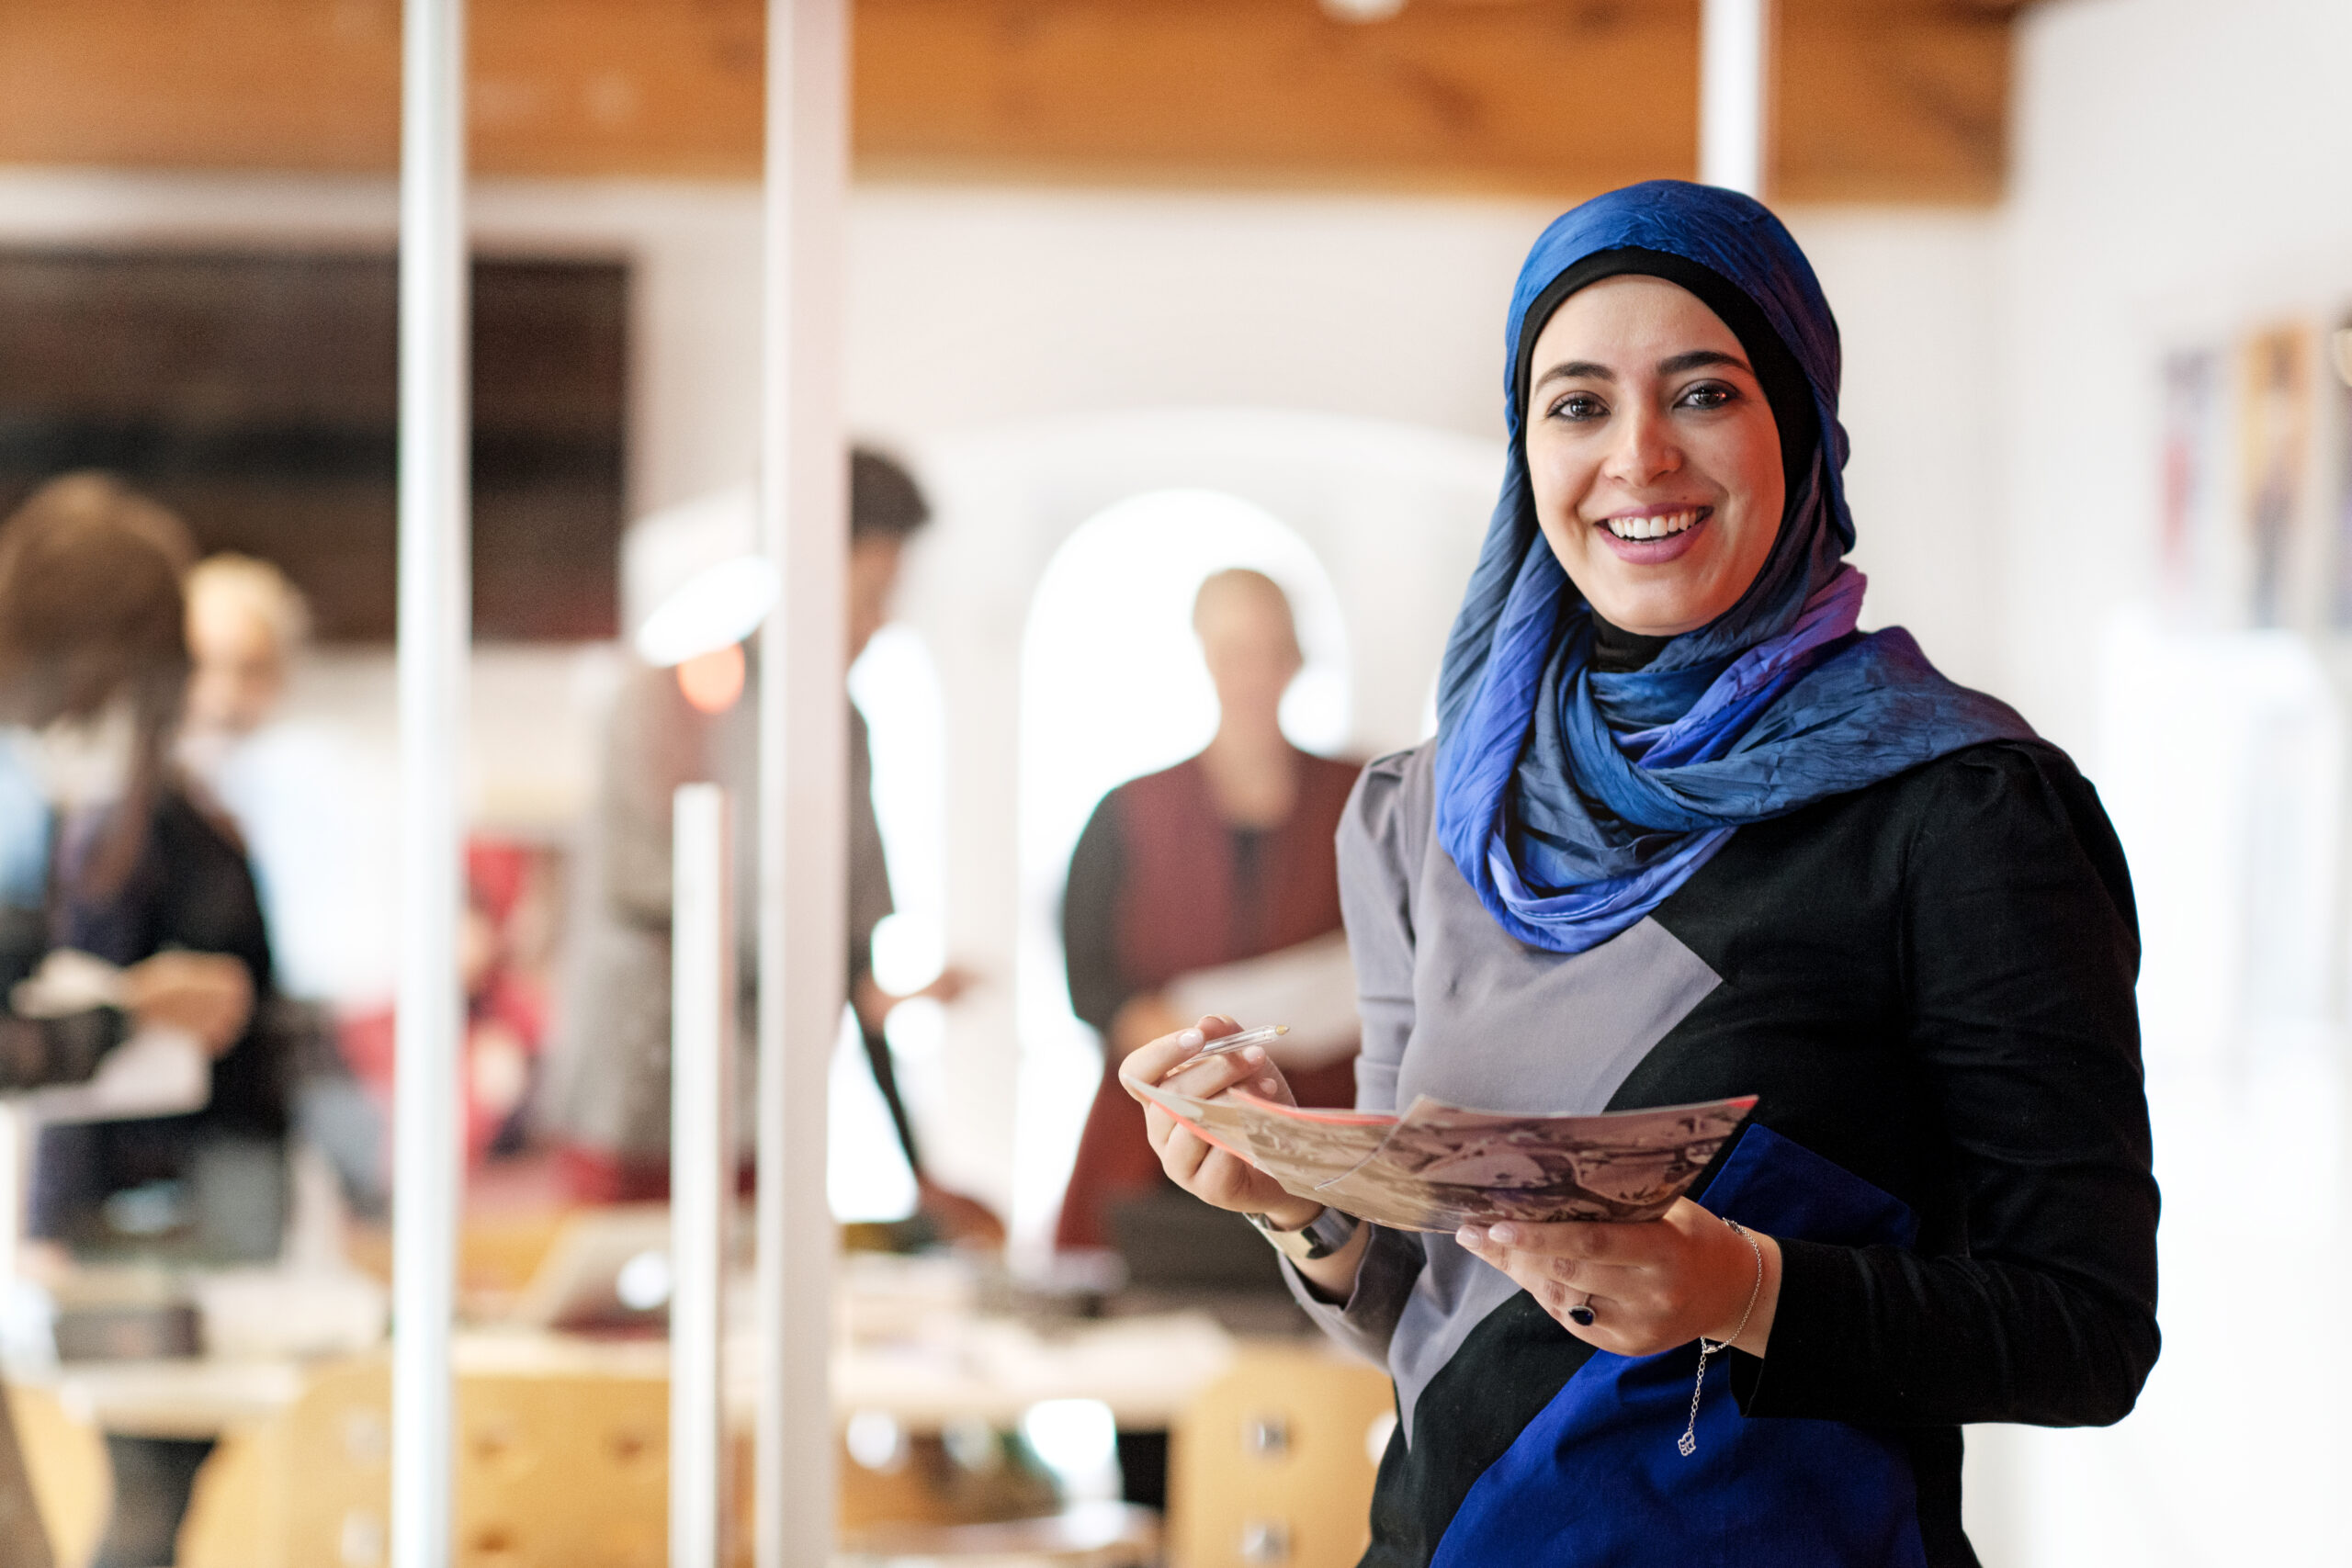 New Report: Afghan Newcomers Bring Critical Value to the U.S. Economy and Society